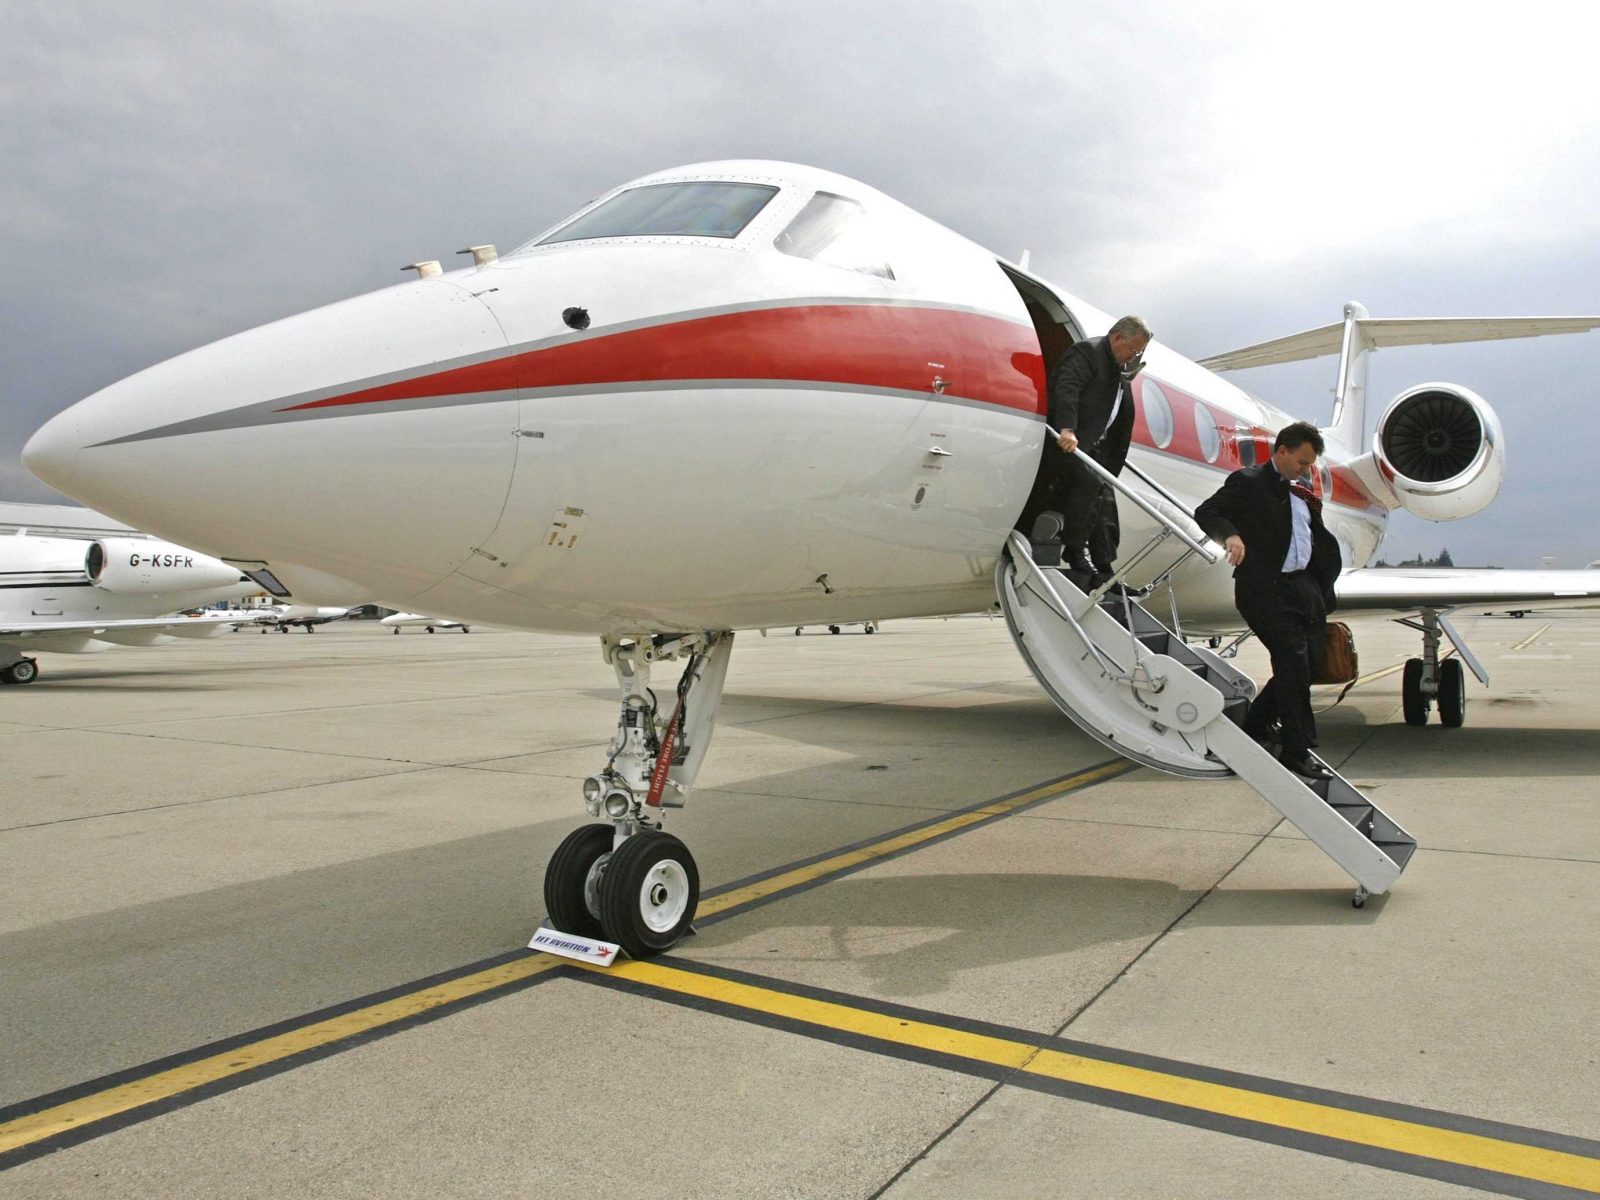 Famous tech billionaires who fly in private jets around the world